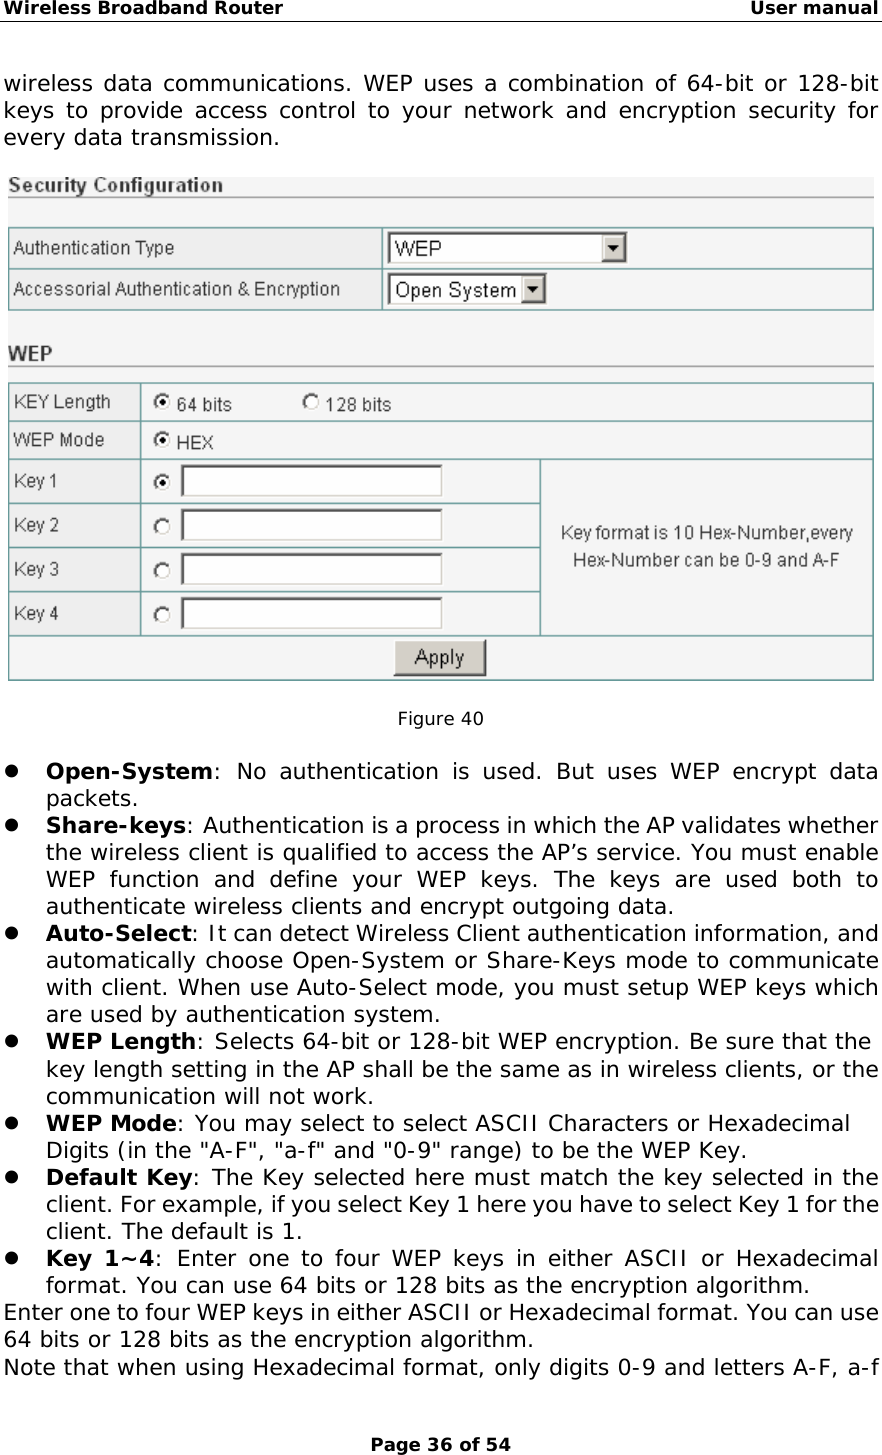 Wireless Broadband Router                                                   User manual Page 36 of 54 wireless data communications. WEP uses a combination of 64-bit or 128-bit keys to provide access control to your network and encryption security for every data transmission.     Figure 40  z Open-System: No authentication is used. But uses WEP encrypt data packets. z Share-keys: Authentication is a process in which the AP validates whether the wireless client is qualified to access the AP’s service. You must enable WEP function and define your WEP keys. The keys are used both to authenticate wireless clients and encrypt outgoing data. z Auto-Select: It can detect Wireless Client authentication information, and automatically choose Open-System or Share-Keys mode to communicate with client. When use Auto-Select mode, you must setup WEP keys which are used by authentication system. z WEP Length: Selects 64-bit or 128-bit WEP encryption. Be sure that the key length setting in the AP shall be the same as in wireless clients, or the communication will not work. z WEP Mode: You may select to select ASCII Characters or Hexadecimal Digits (in the &quot;A-F&quot;, &quot;a-f&quot; and &quot;0-9&quot; range) to be the WEP Key. z Default Key: The Key selected here must match the key selected in the client. For example, if you select Key 1 here you have to select Key 1 for the client. The default is 1.  z Key 1~4: Enter one to four WEP keys in either ASCII or Hexadecimal format. You can use 64 bits or 128 bits as the encryption algorithm.  Enter one to four WEP keys in either ASCII or Hexadecimal format. You can use 64 bits or 128 bits as the encryption algorithm. Note that when using Hexadecimal format, only digits 0-9 and letters A-F, a-f 